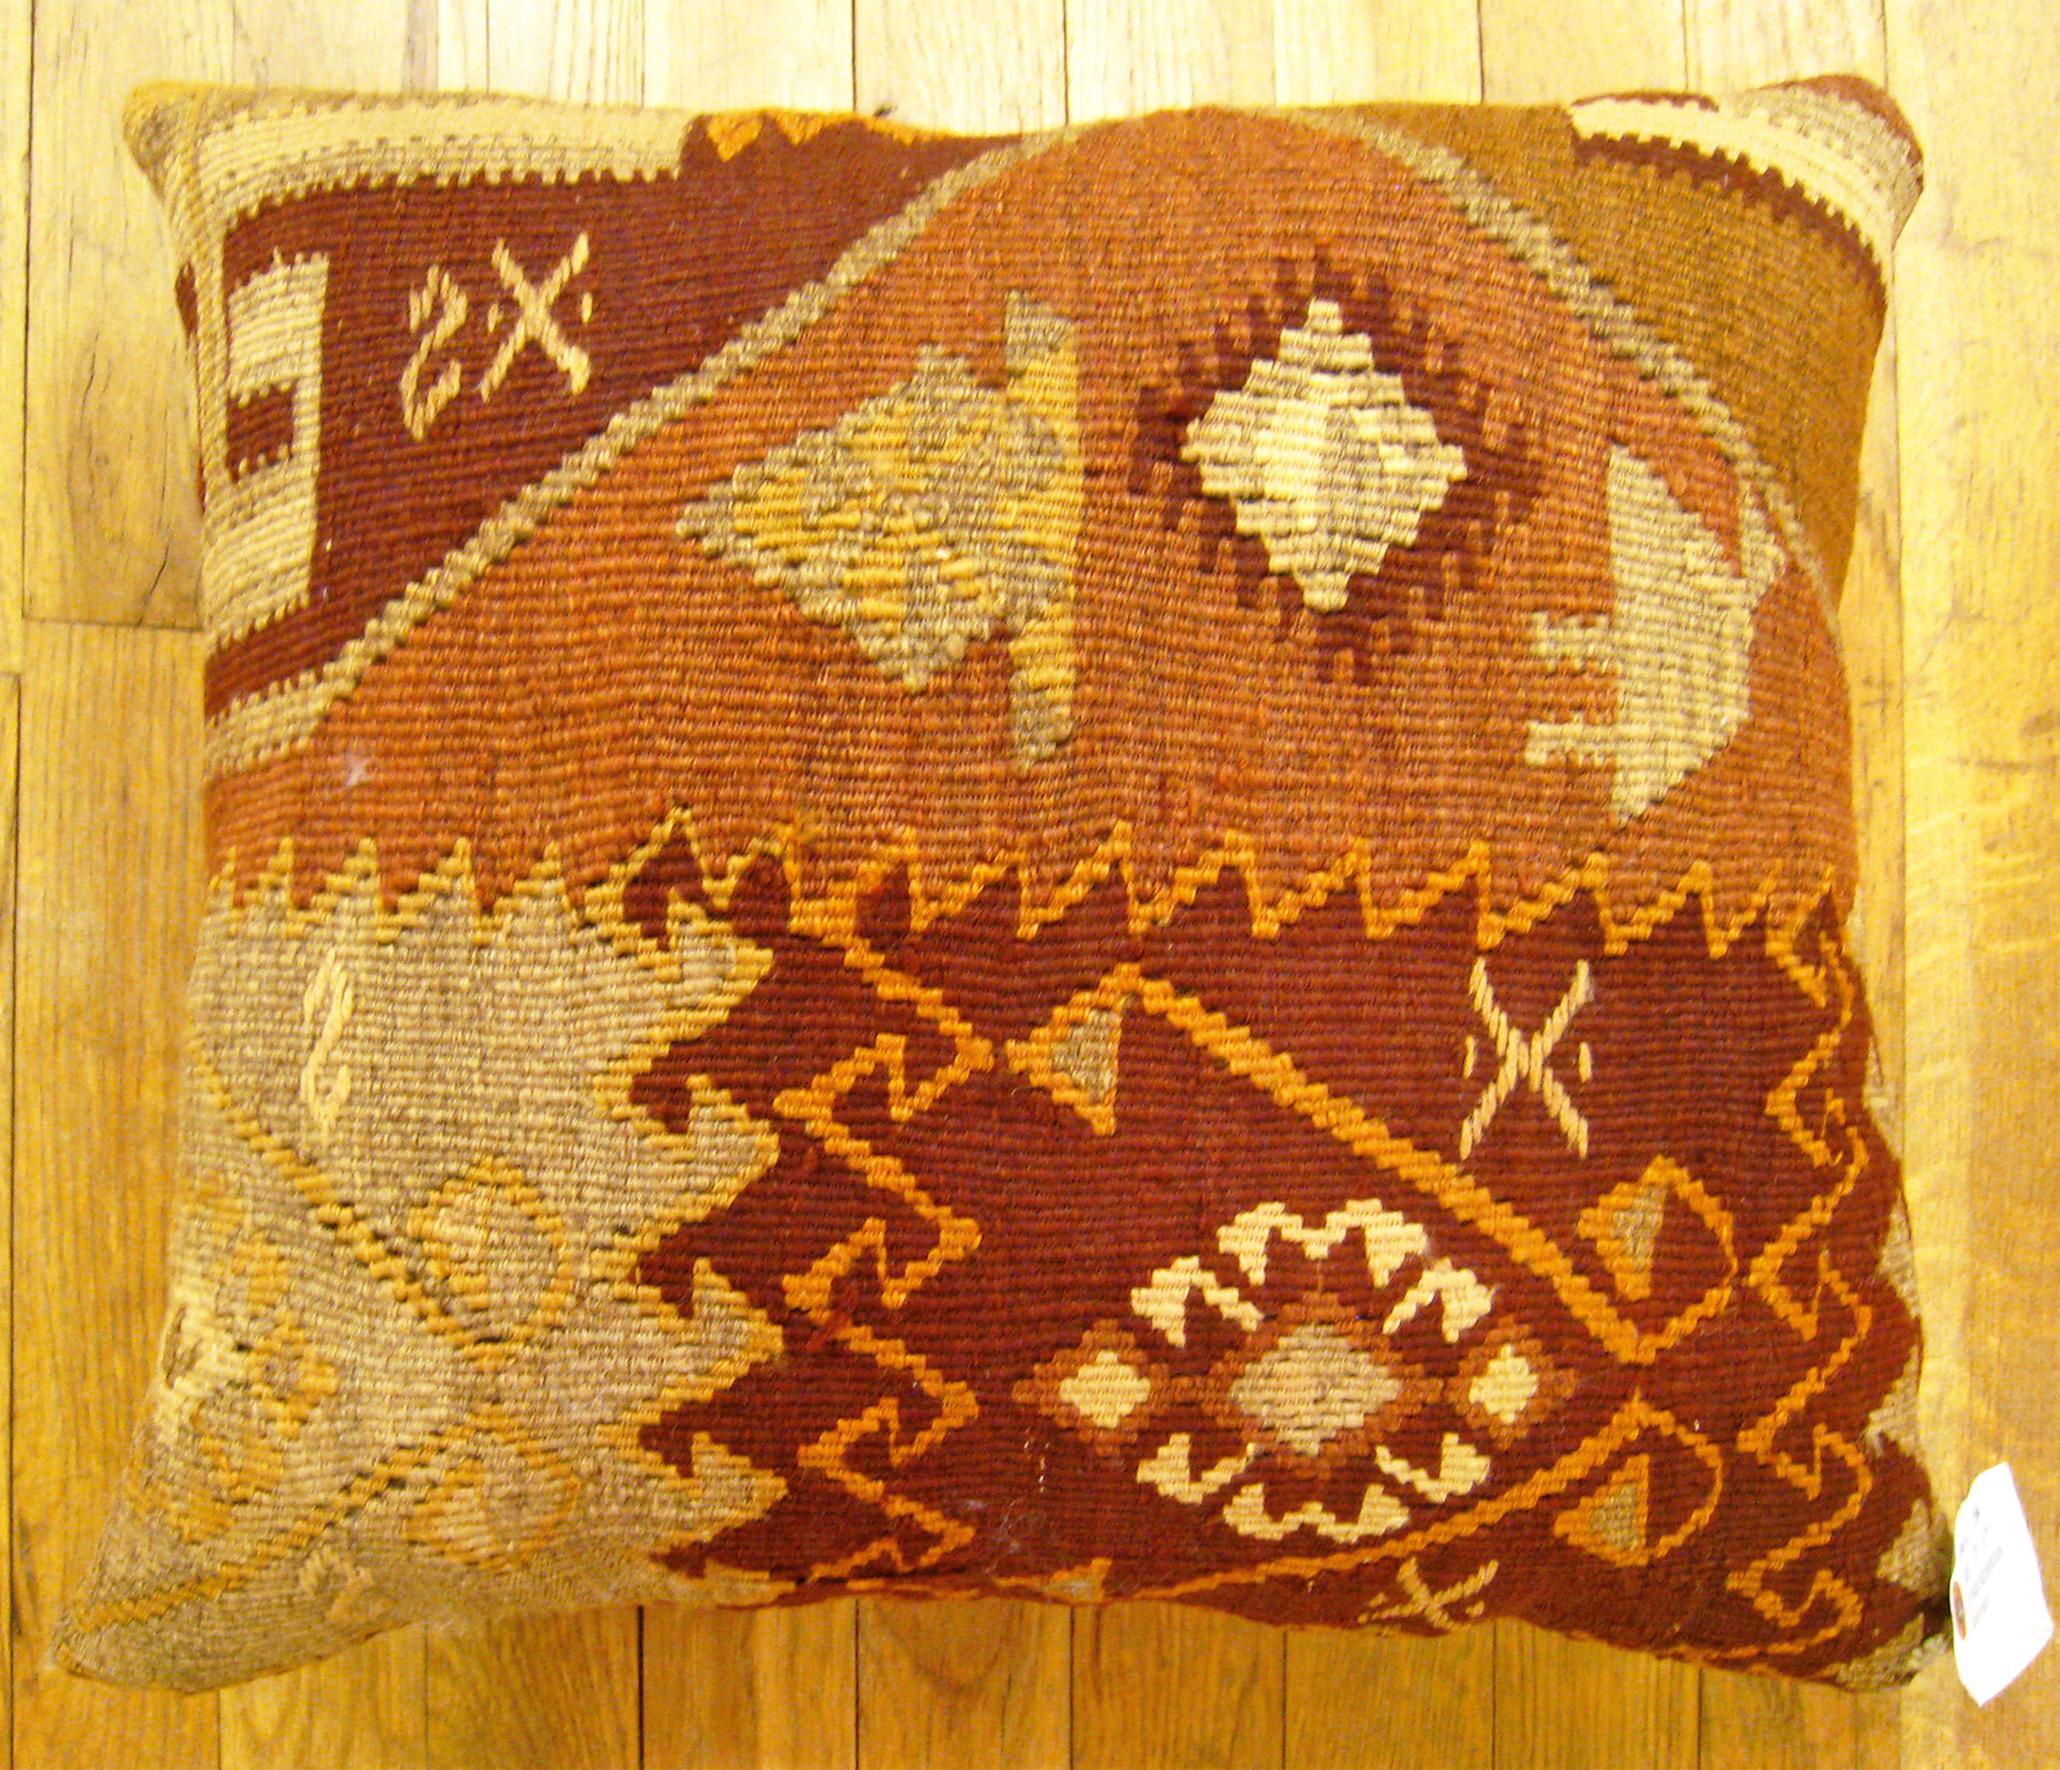 Vintage Turkish Kilim Rug Pillow; size 17” x 18”.

A vintage decorative pillow with geometric abstracts allover a brown central field, size 17” x 18”. This lovely decorative pillow features a vintage fabric of a KIilim carpet on front which is